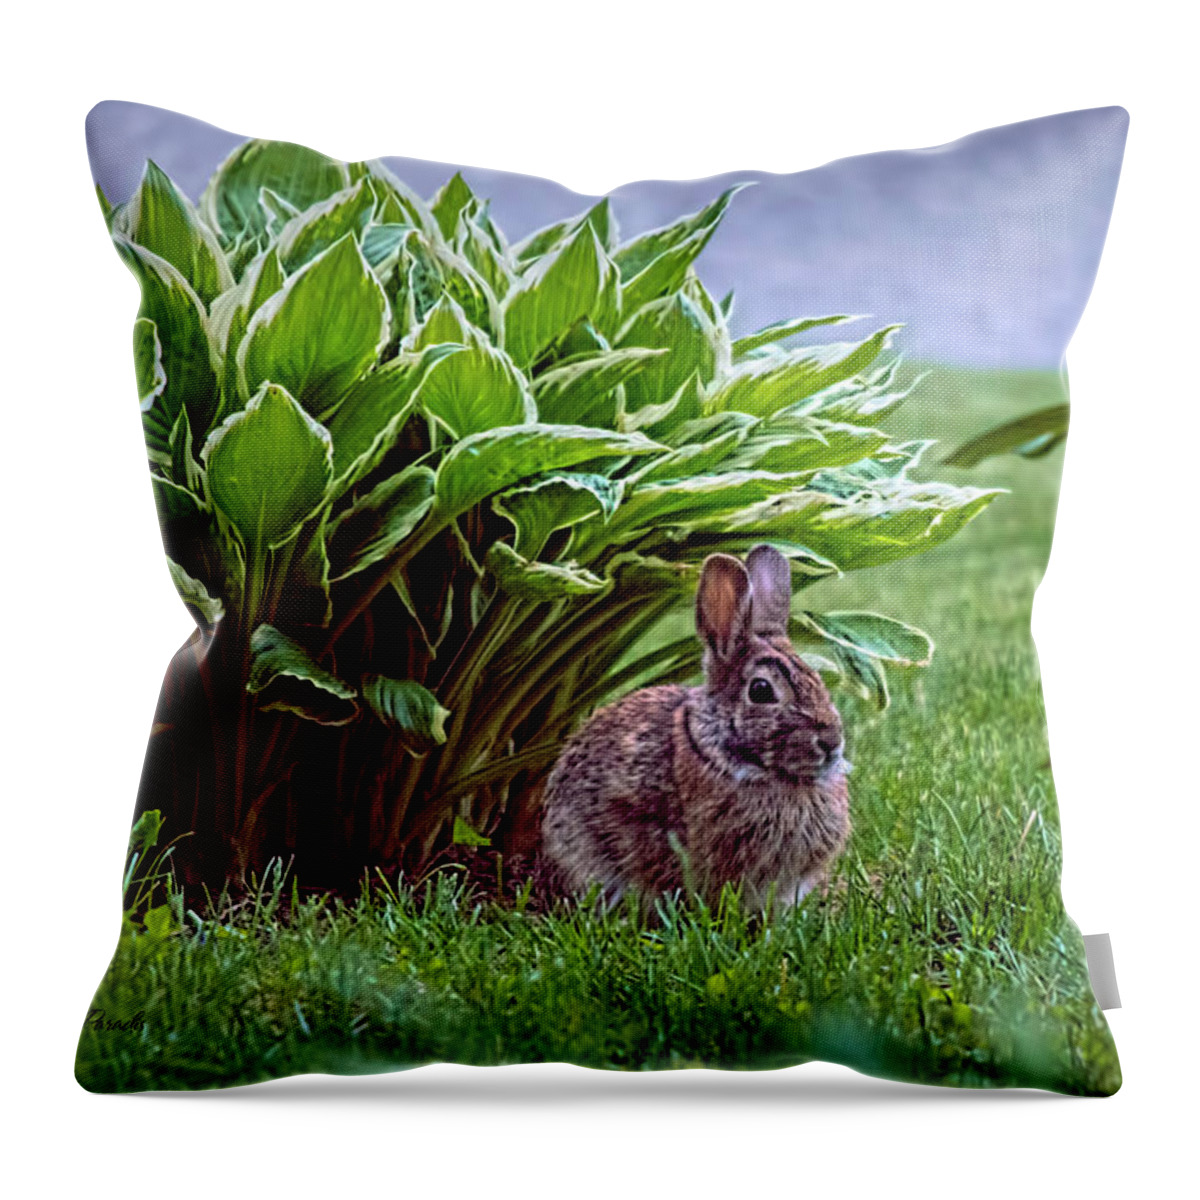 Bunny Throw Pillow featuring the photograph My Peter Rabbit by ChelleAnne Paradis